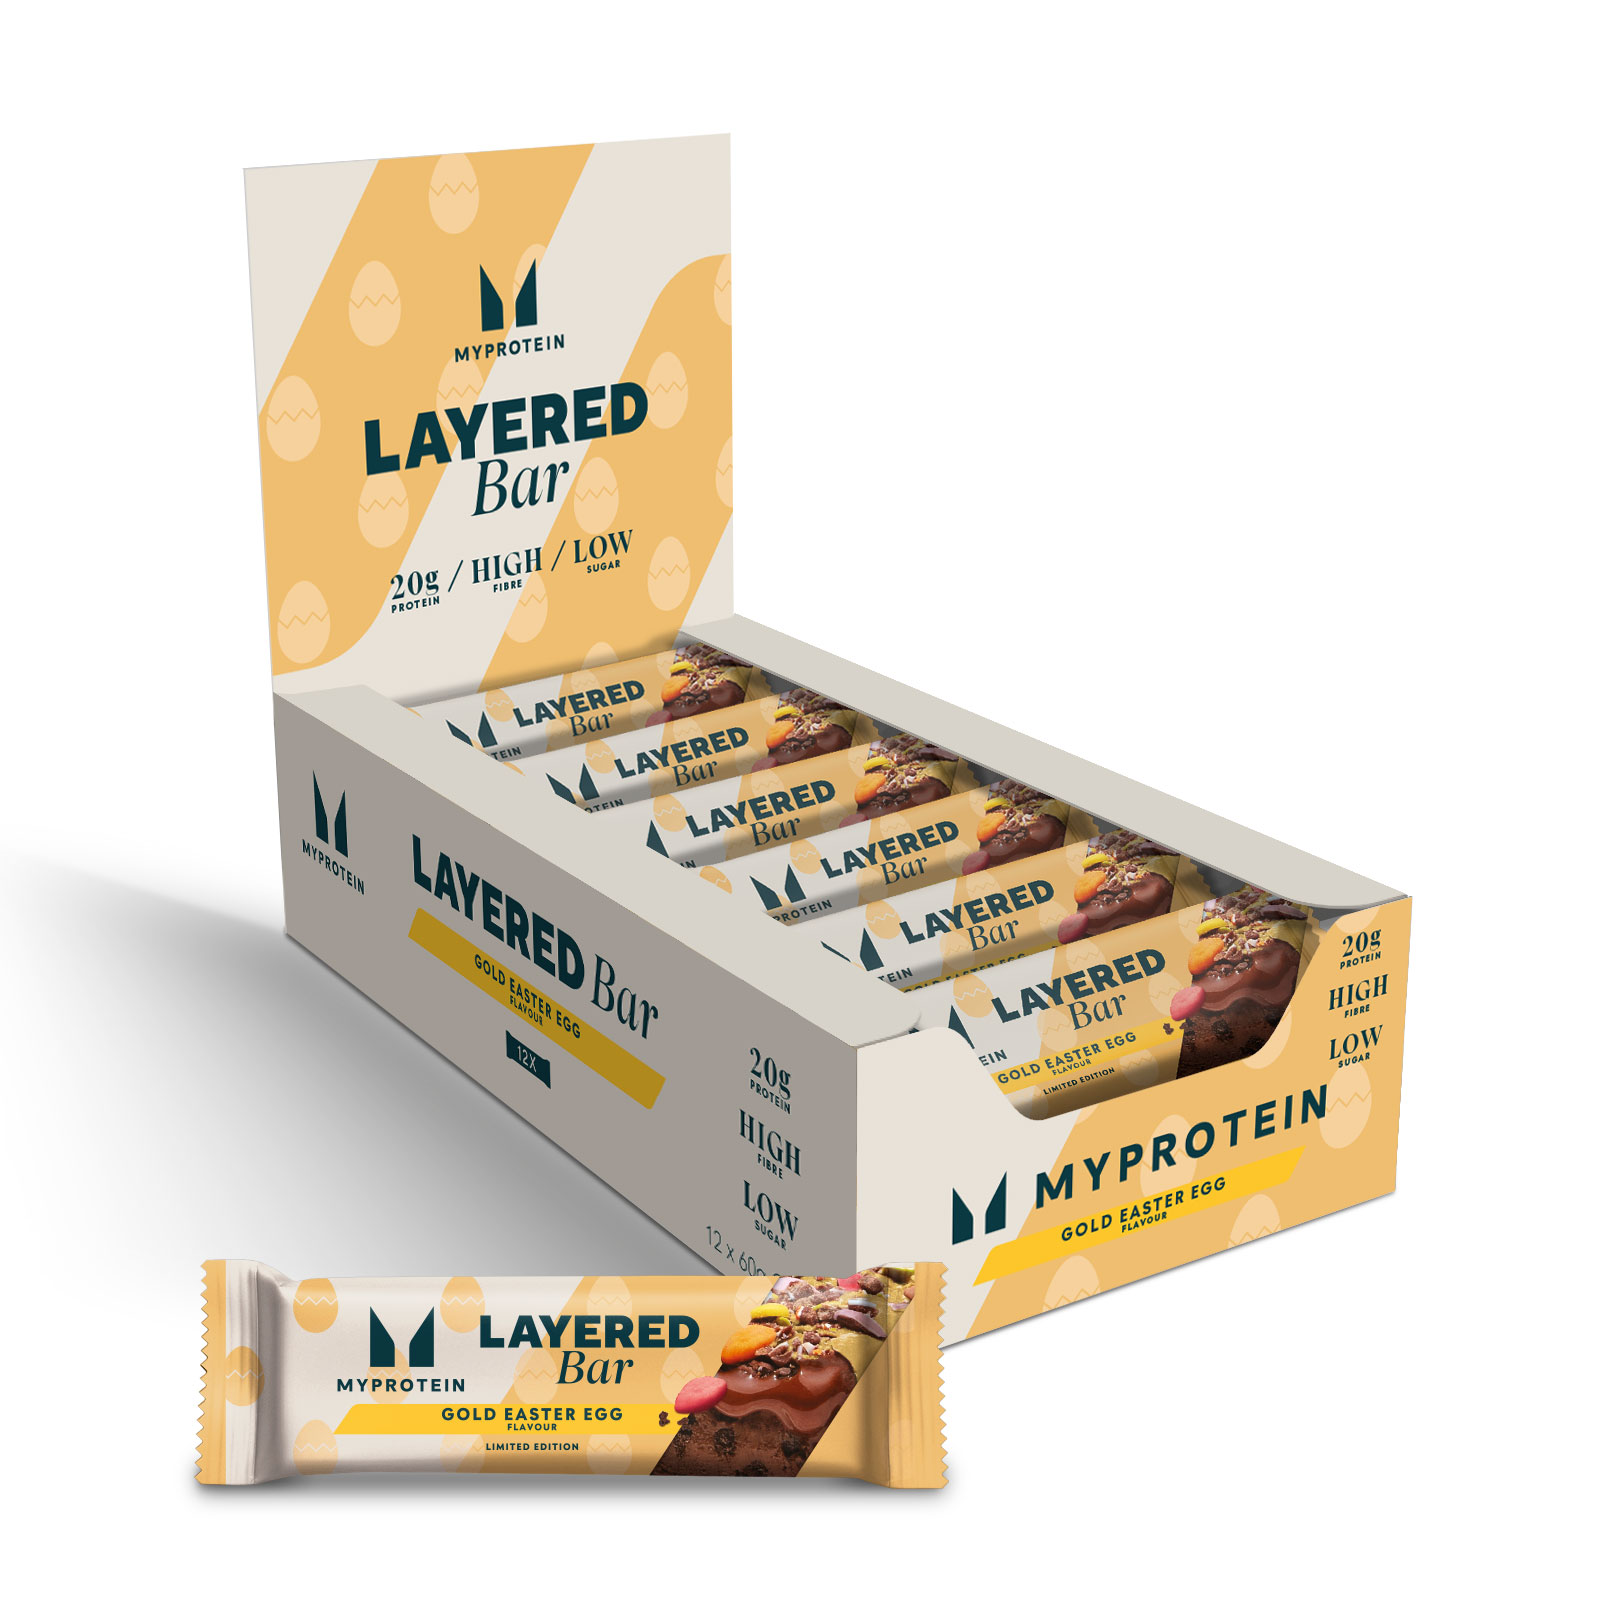 Layered Protein Bar - 12 x 60g - Limited Edition - Gold Choc Easter Egg